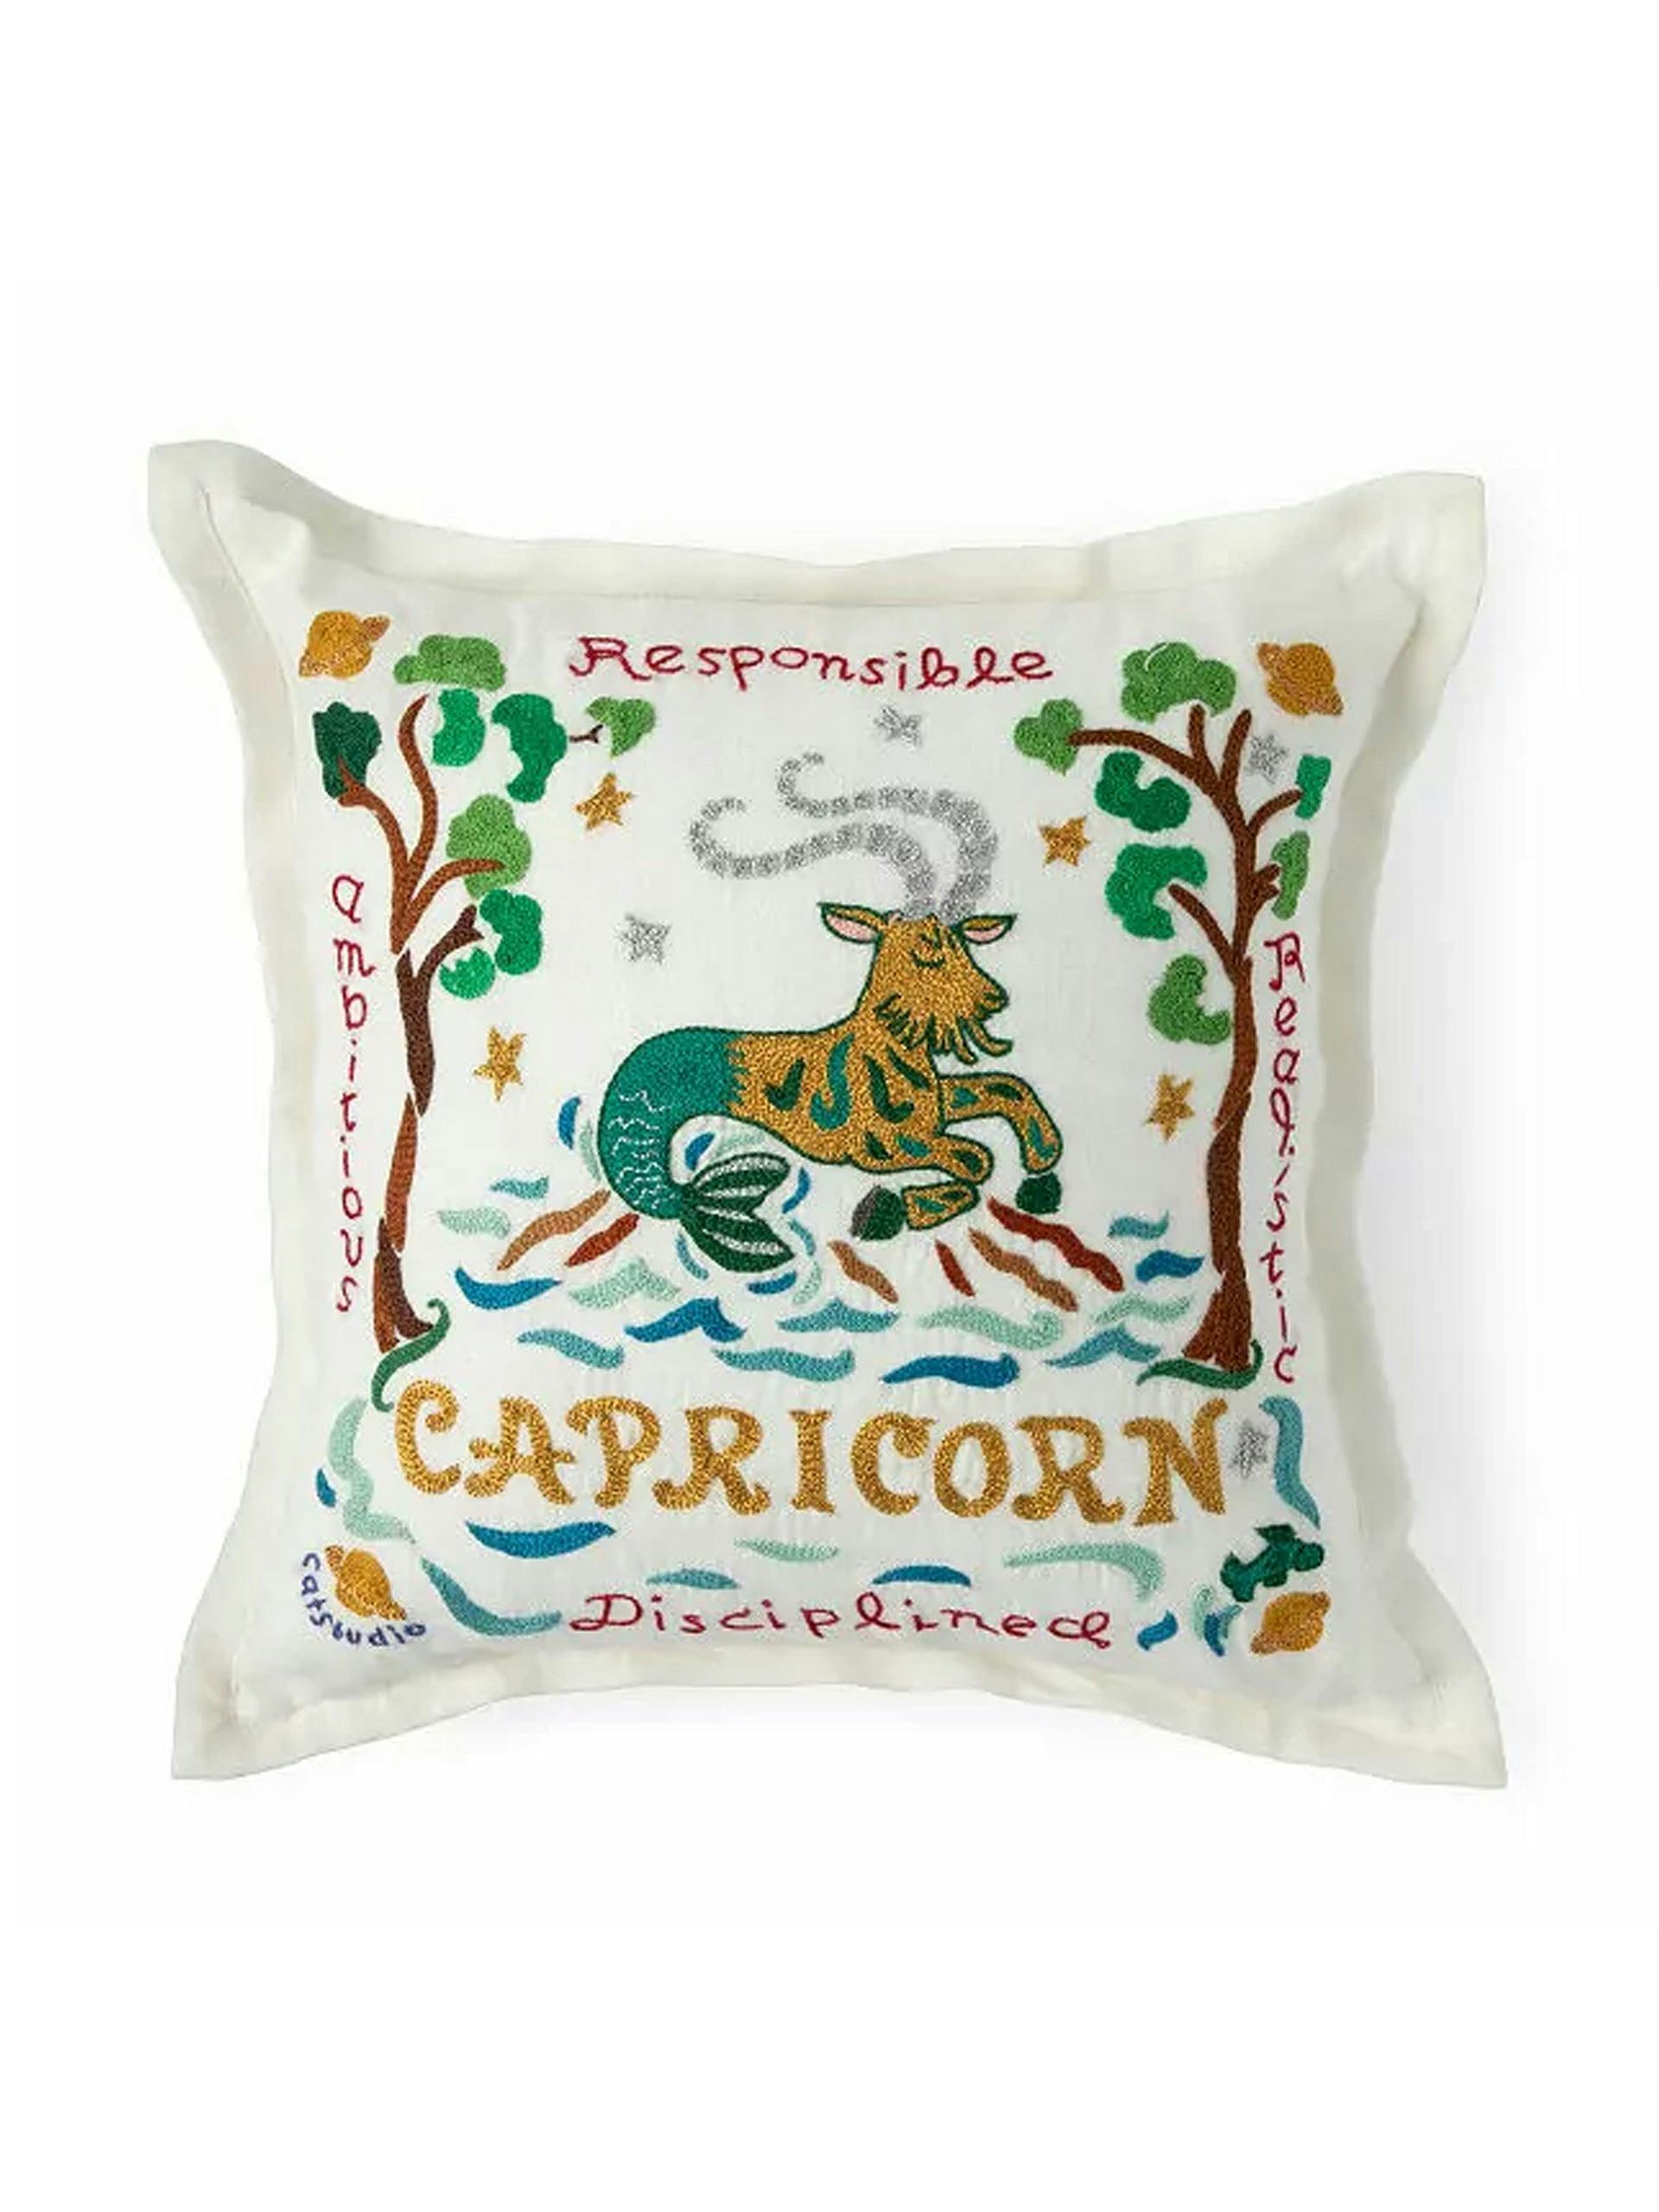 Hand-embroidered astrology cushion